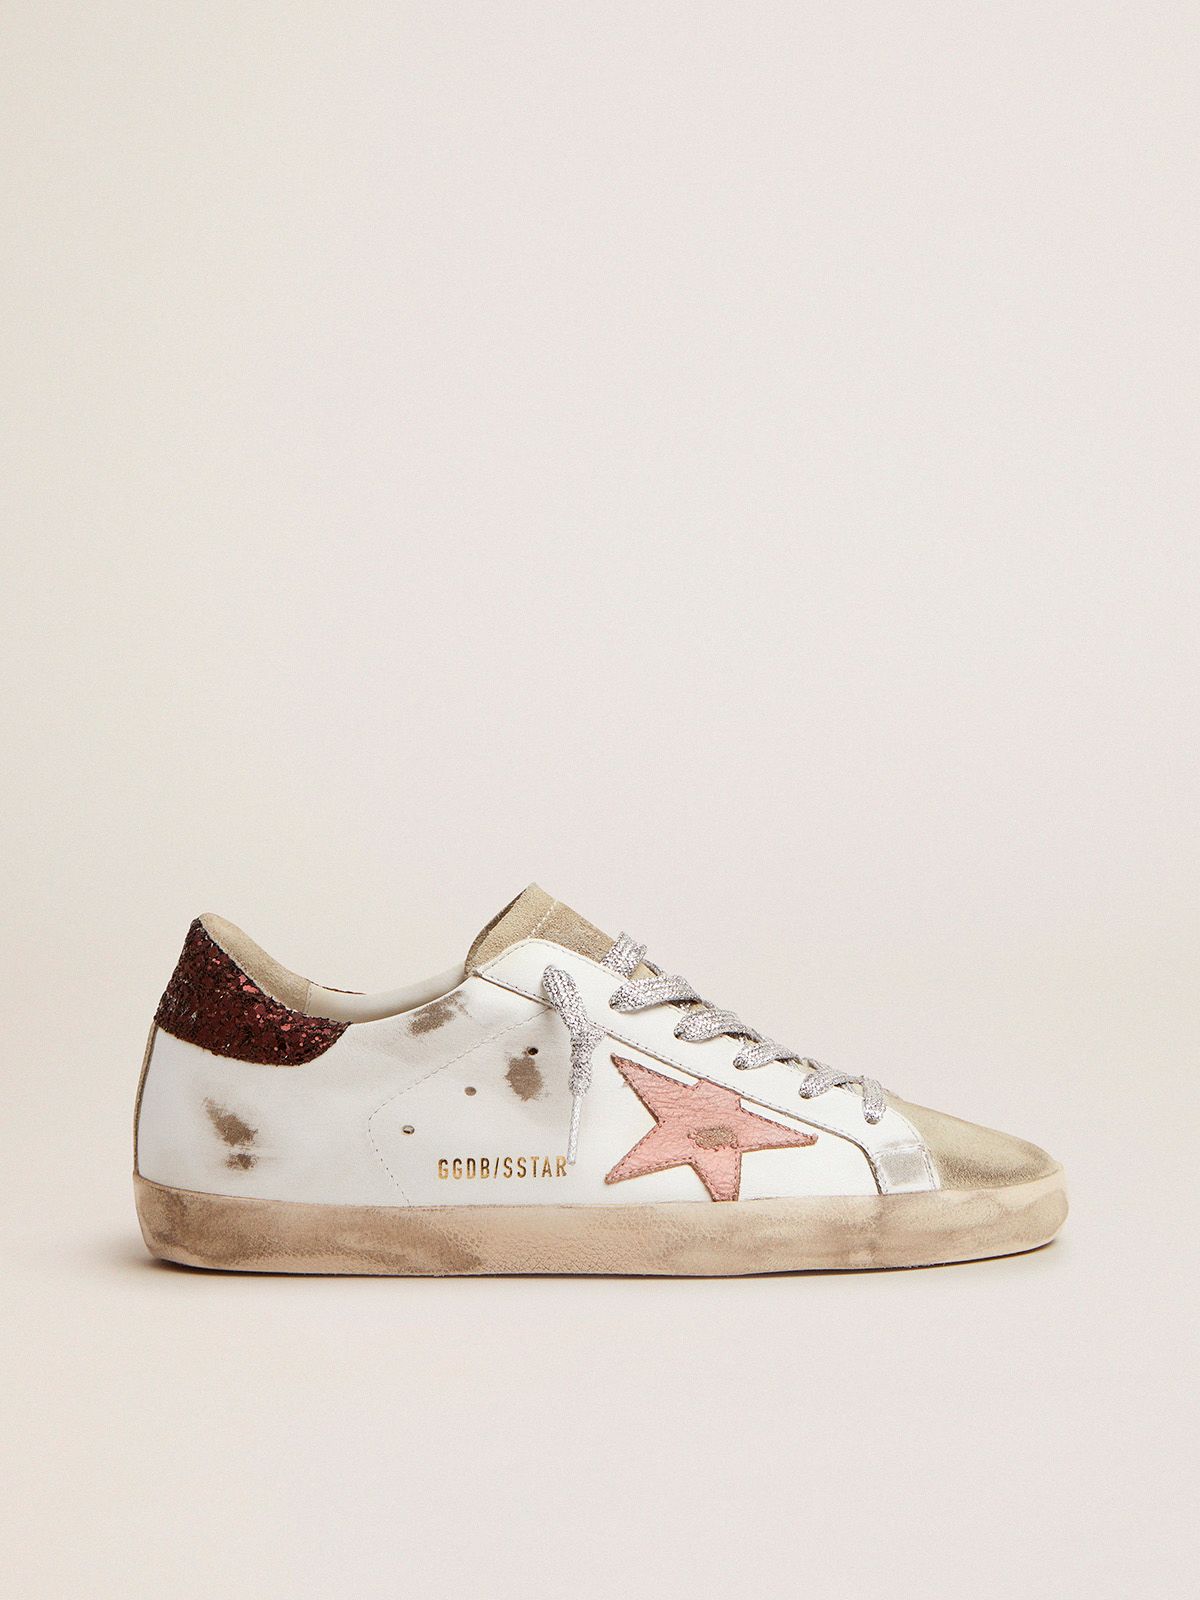 golden goose heel sneakers pink with crackled Super-Star tab star and brown glitter leather